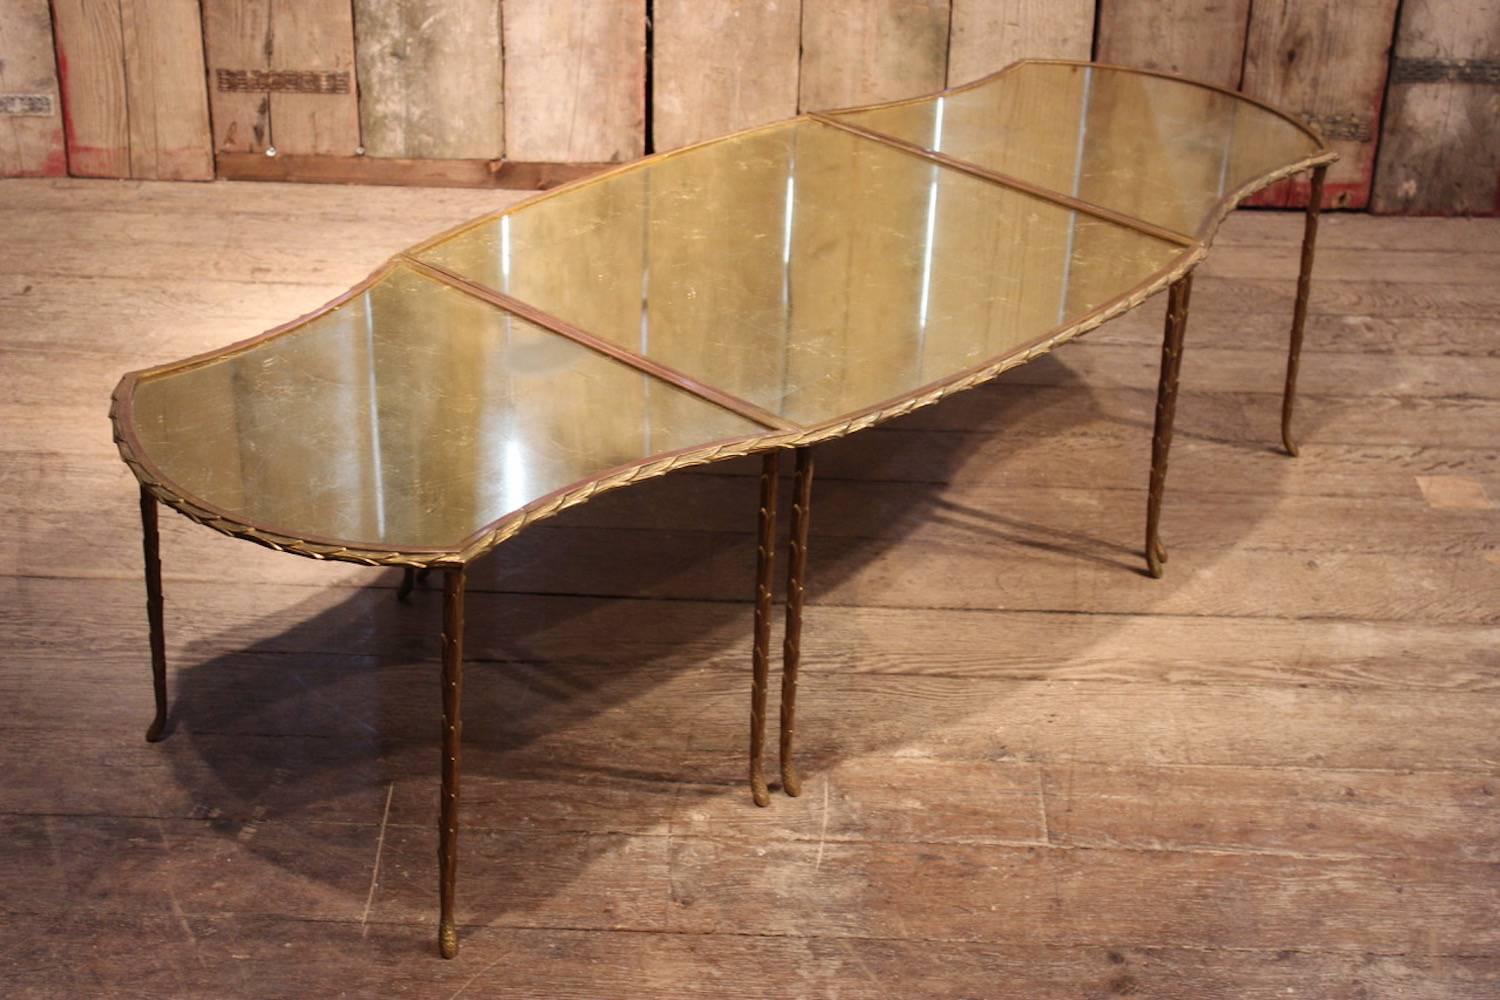 A glamorous and fine quality cast and gilt bronze coffee table, attributed to Maison Baguès, composed of three sections, with a verre églomisé top, the frame cast as running palm leaves, French, 1950s.